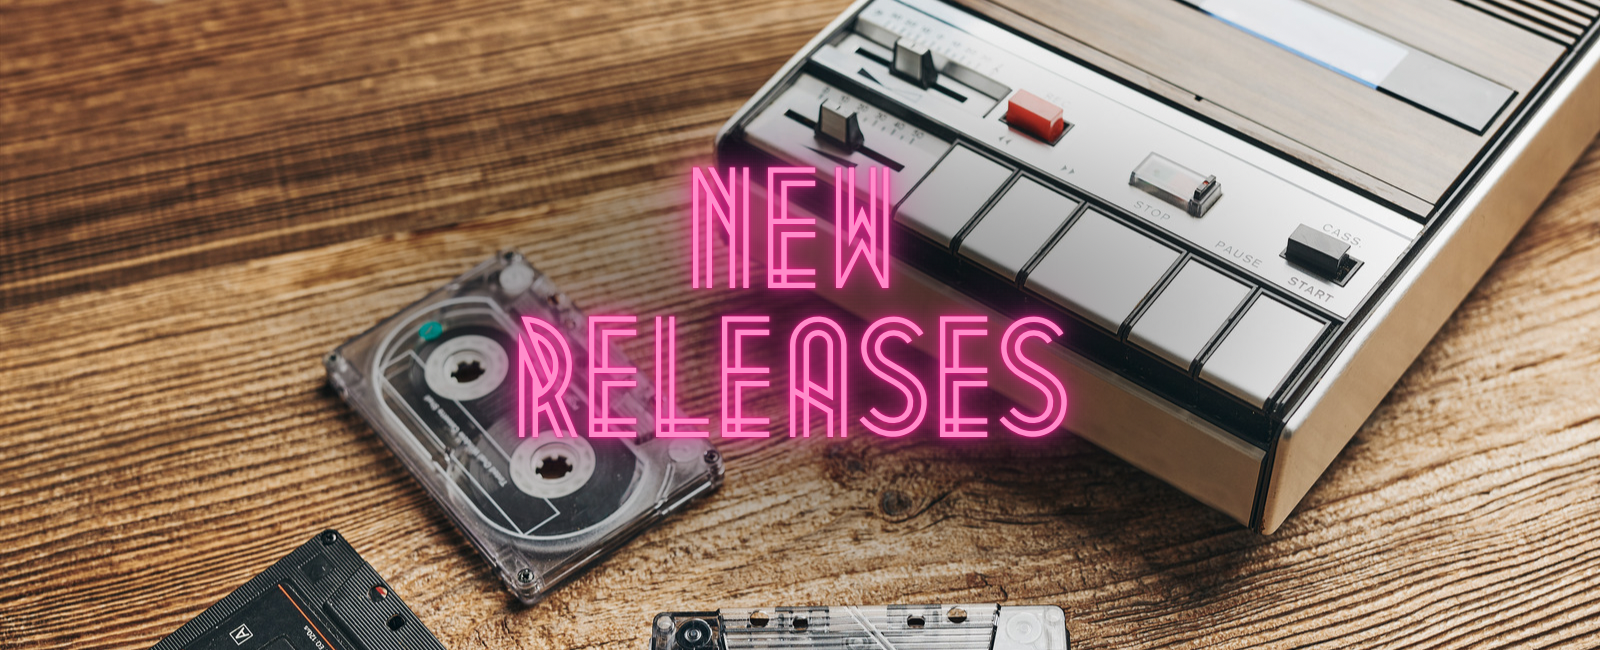 Check Out Some New Releases From Ducain, Jeremy Short, Samuel James, Lauren Winans, No Forks Dinosaur Burps, and Chris Nichols.